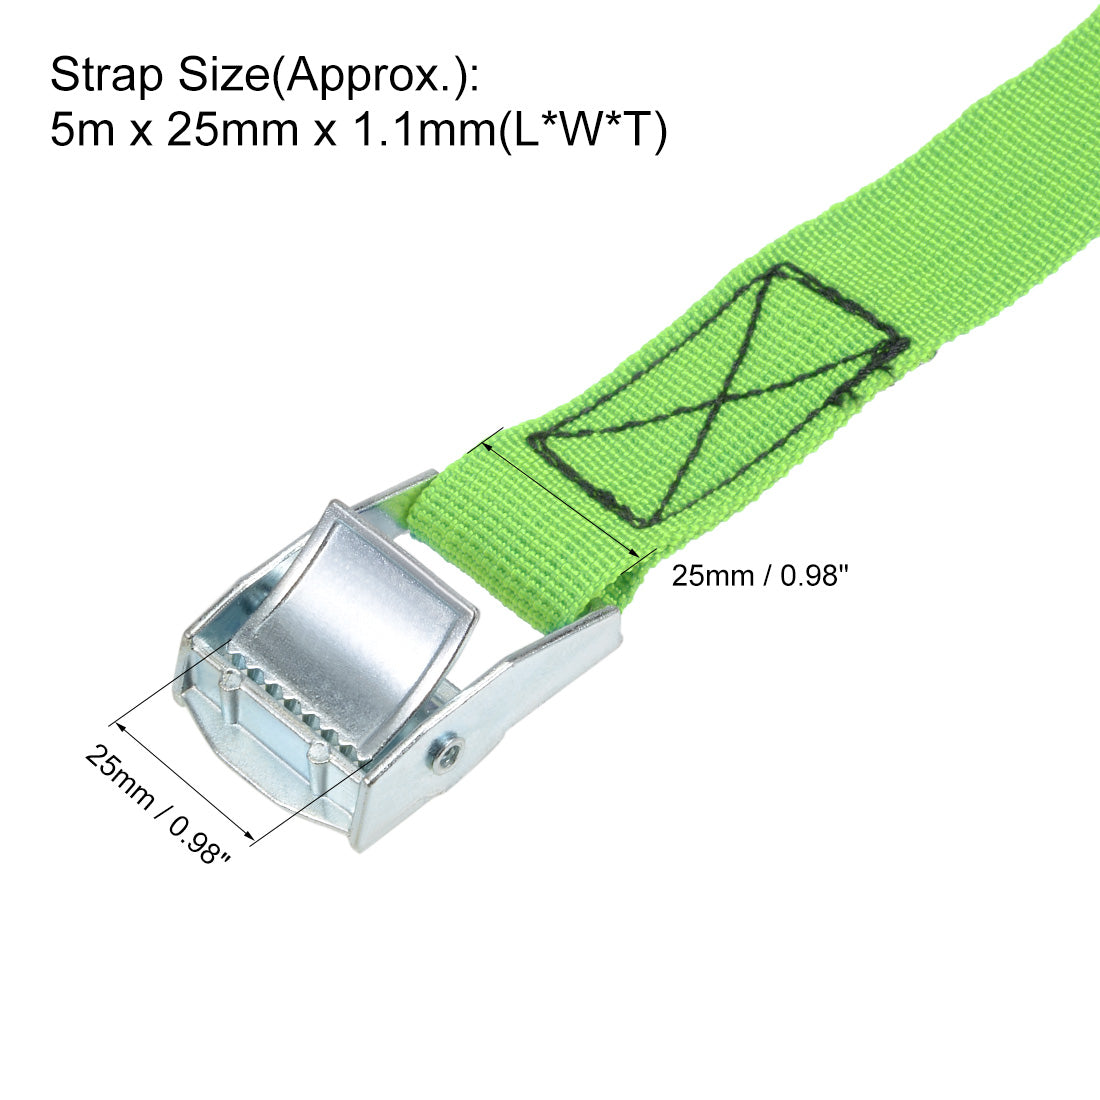 uxcell Uxcell Lashing Strap 1" x 16' Cargo Tie Down Straps with Cam Lock Buckle Up to 551lbs Green 2pcs